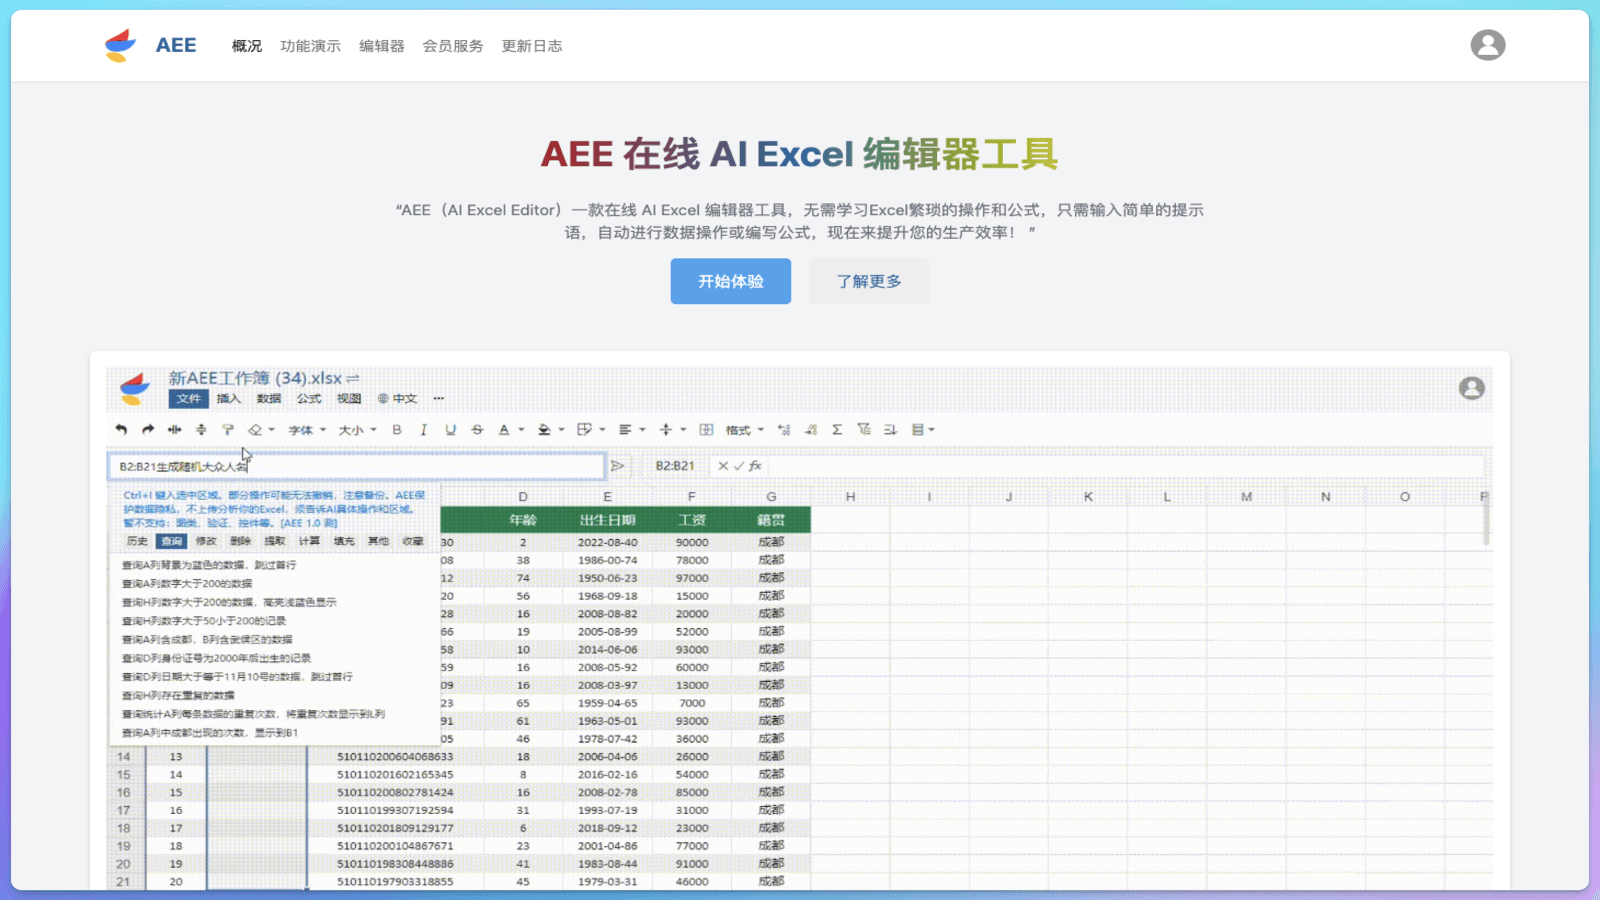 AEE - AI Excel 编辑器